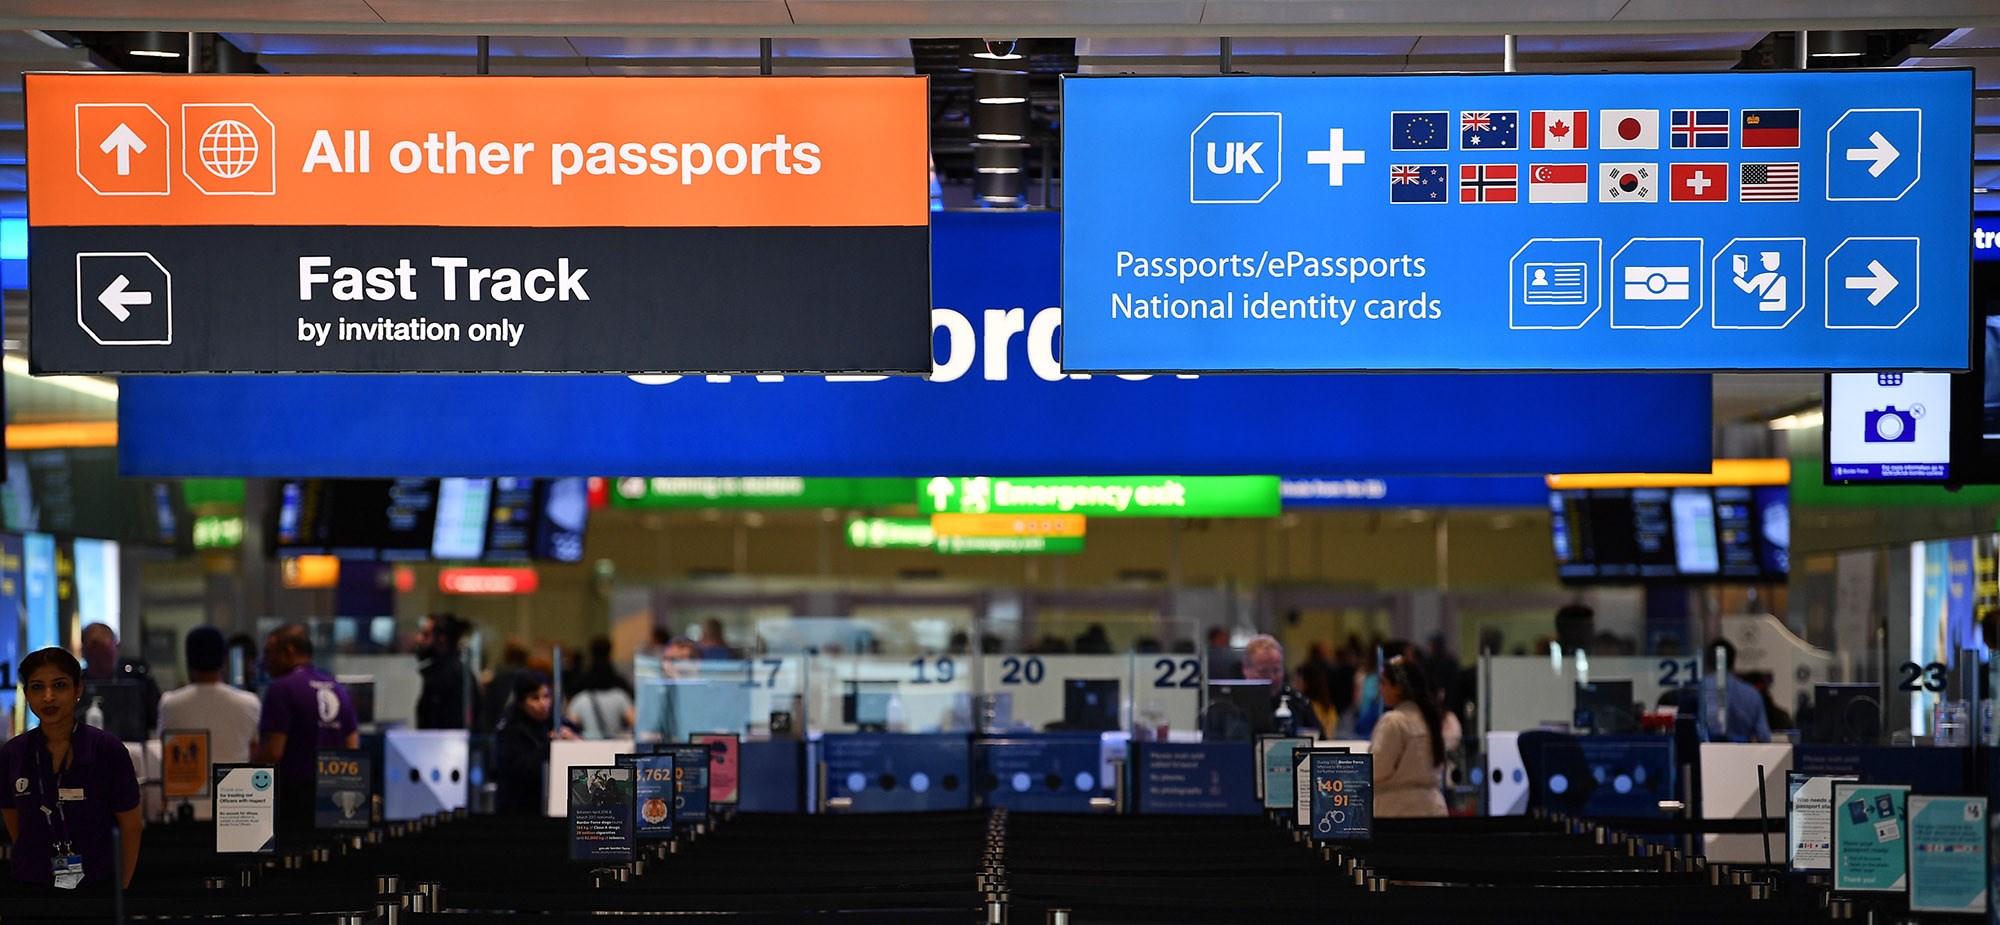 Economy: Border Patrol will strike at many UK airports at Christmas and New Year’s Eve